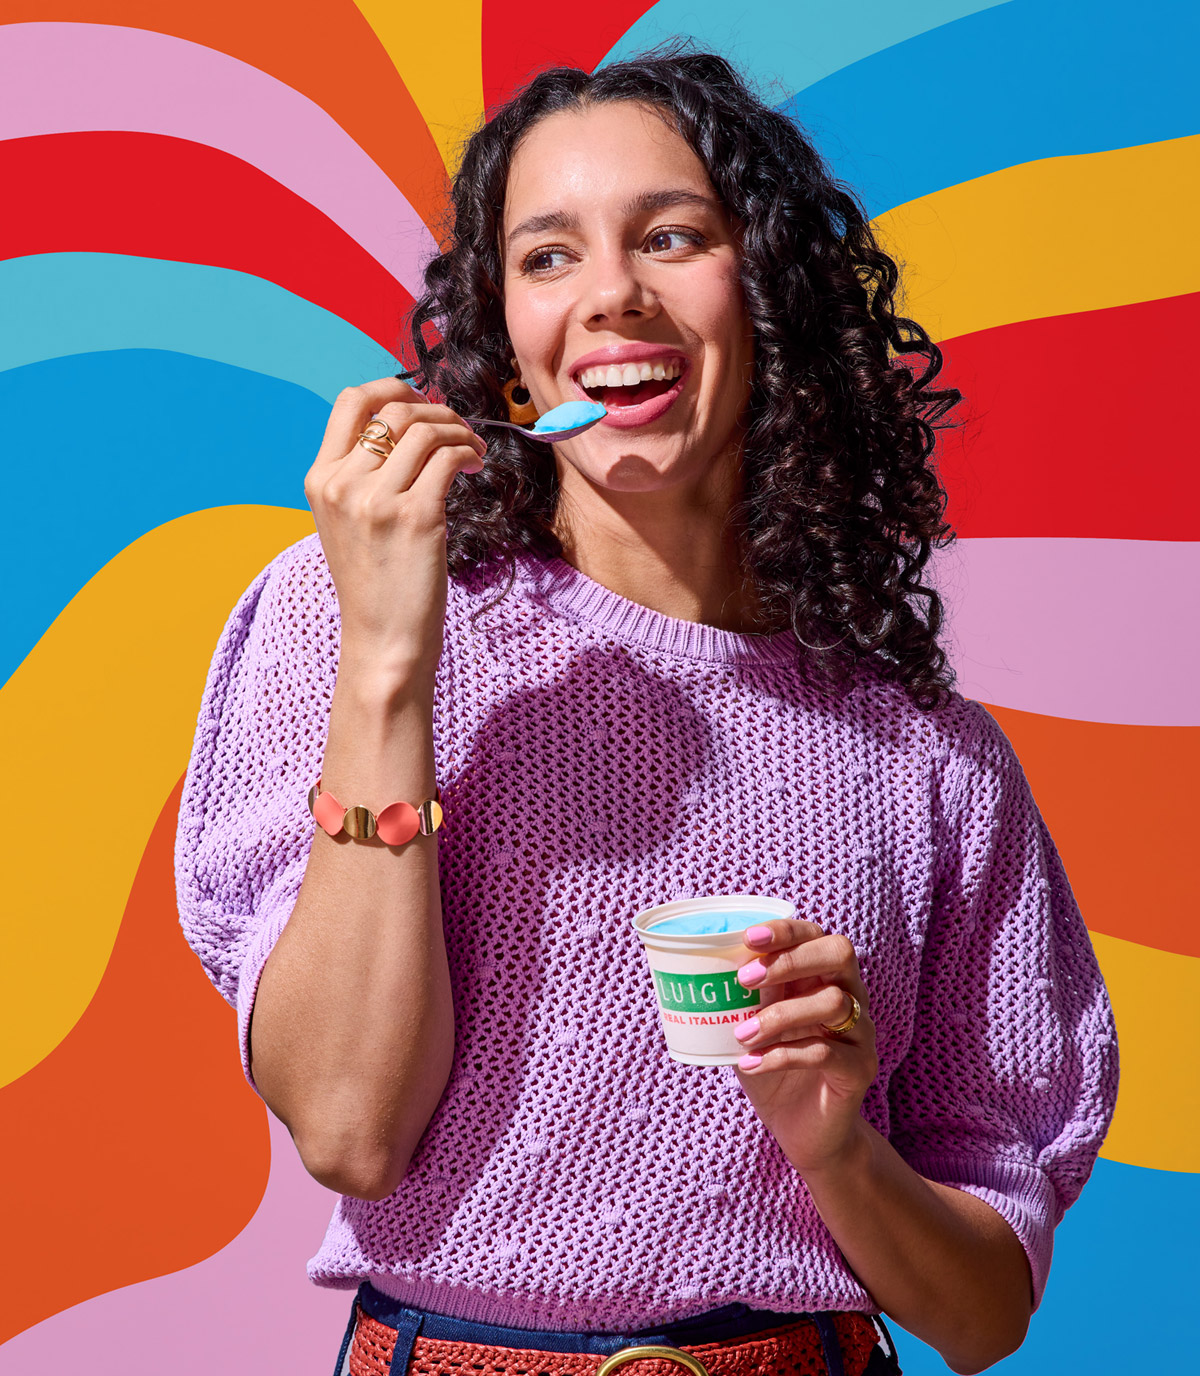 Woman eating blue raspberry LUIGI'S Real Italian Ice. Woman is smiling, wearing a purple top, and is holding the spoon of blue raspberry Italian ice up to her mouth. She is standing in front of a psychedelic rainbow background.